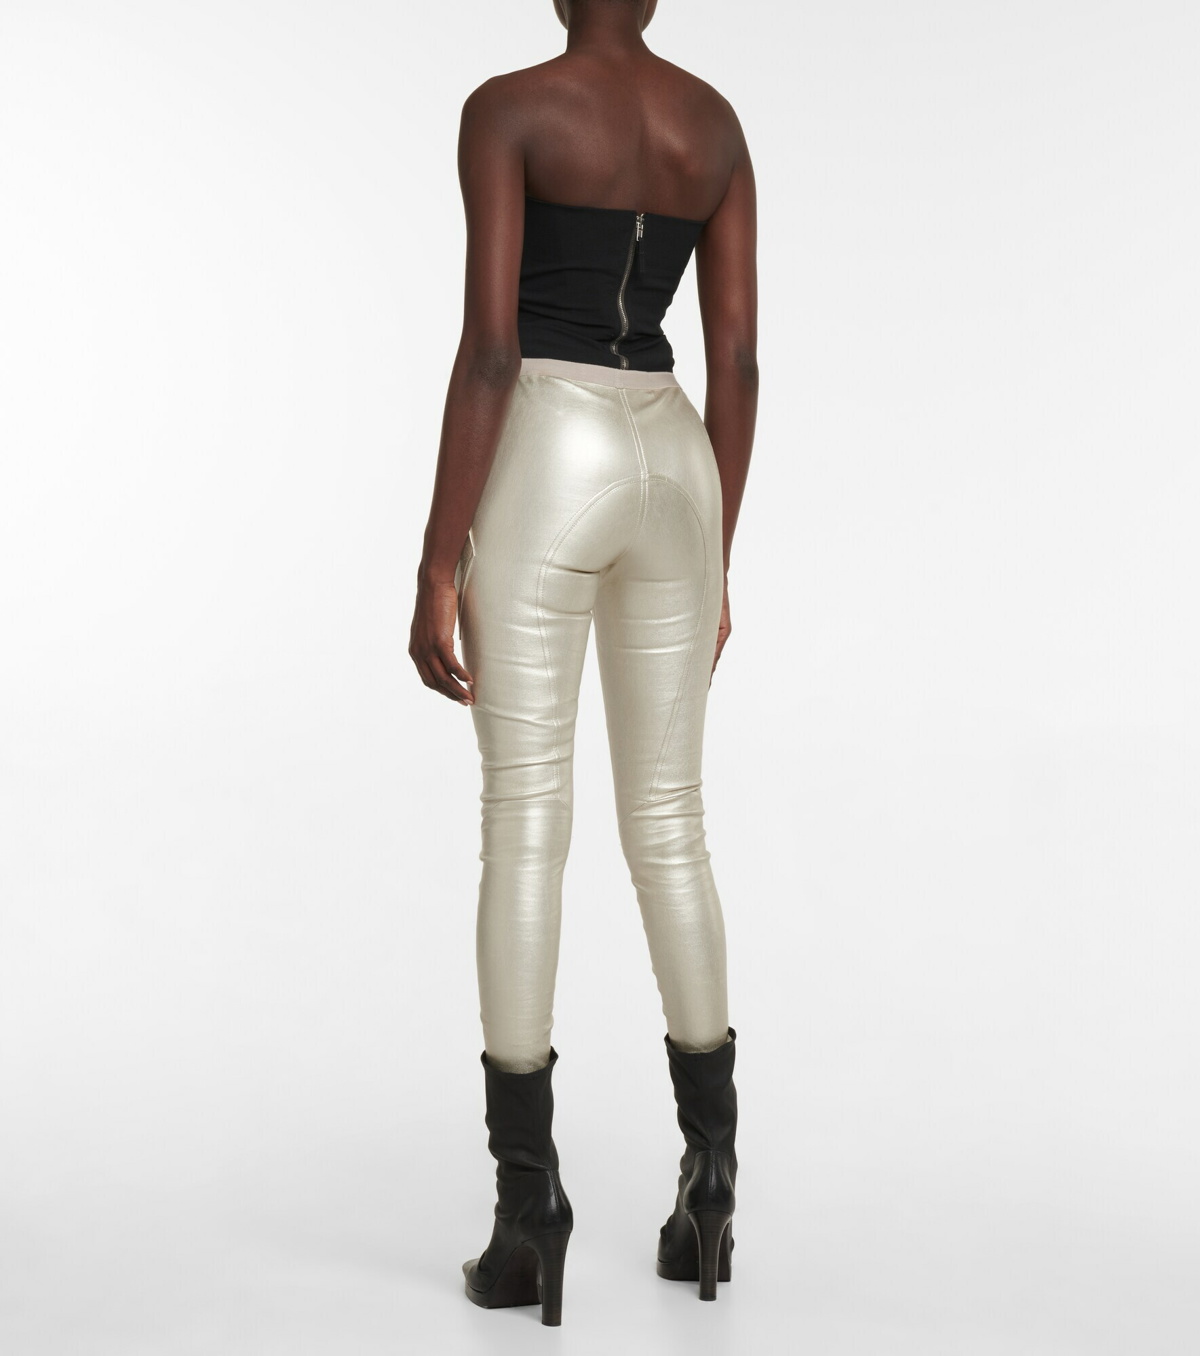 Buy Rick Owens Leather Trousers online - 18 products | FASHIOLA.in